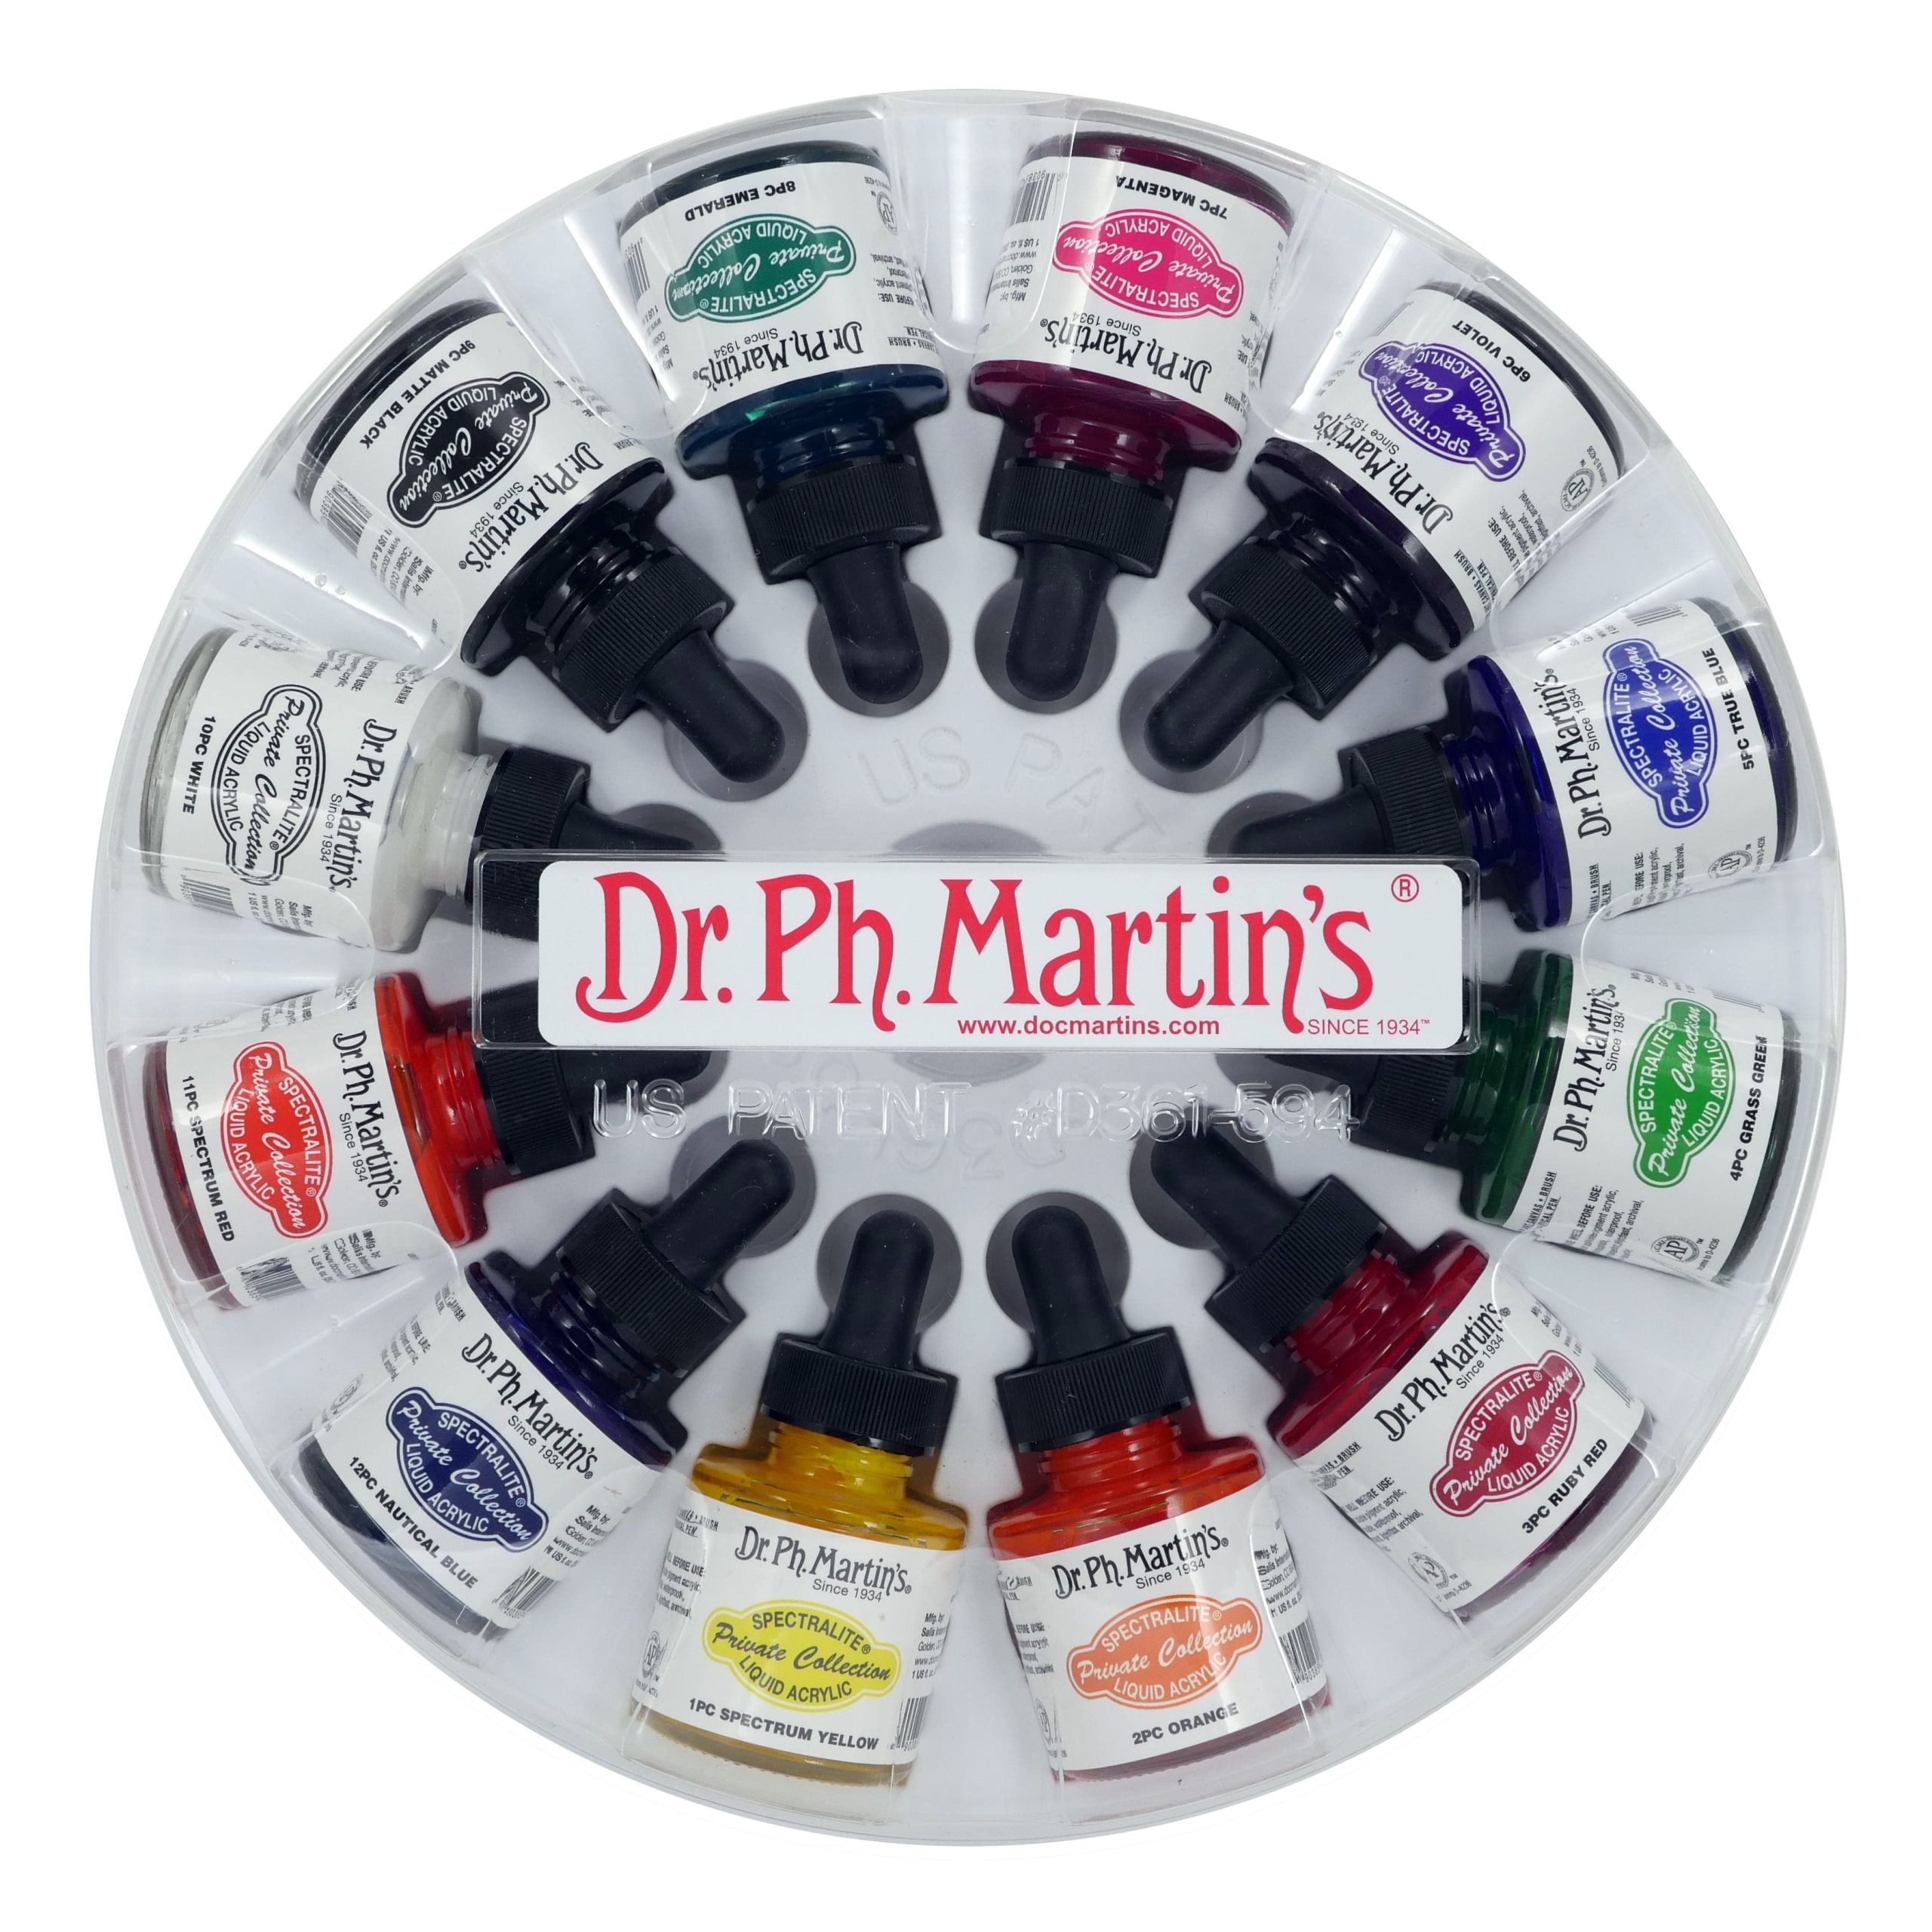 Dr. Ph. Martin's Spectralite Private Collection Liquid Acrylic Ink 29.5ml  Set of 12 (Set 1) SAL for sale at reasonable prices Shop Our Selection